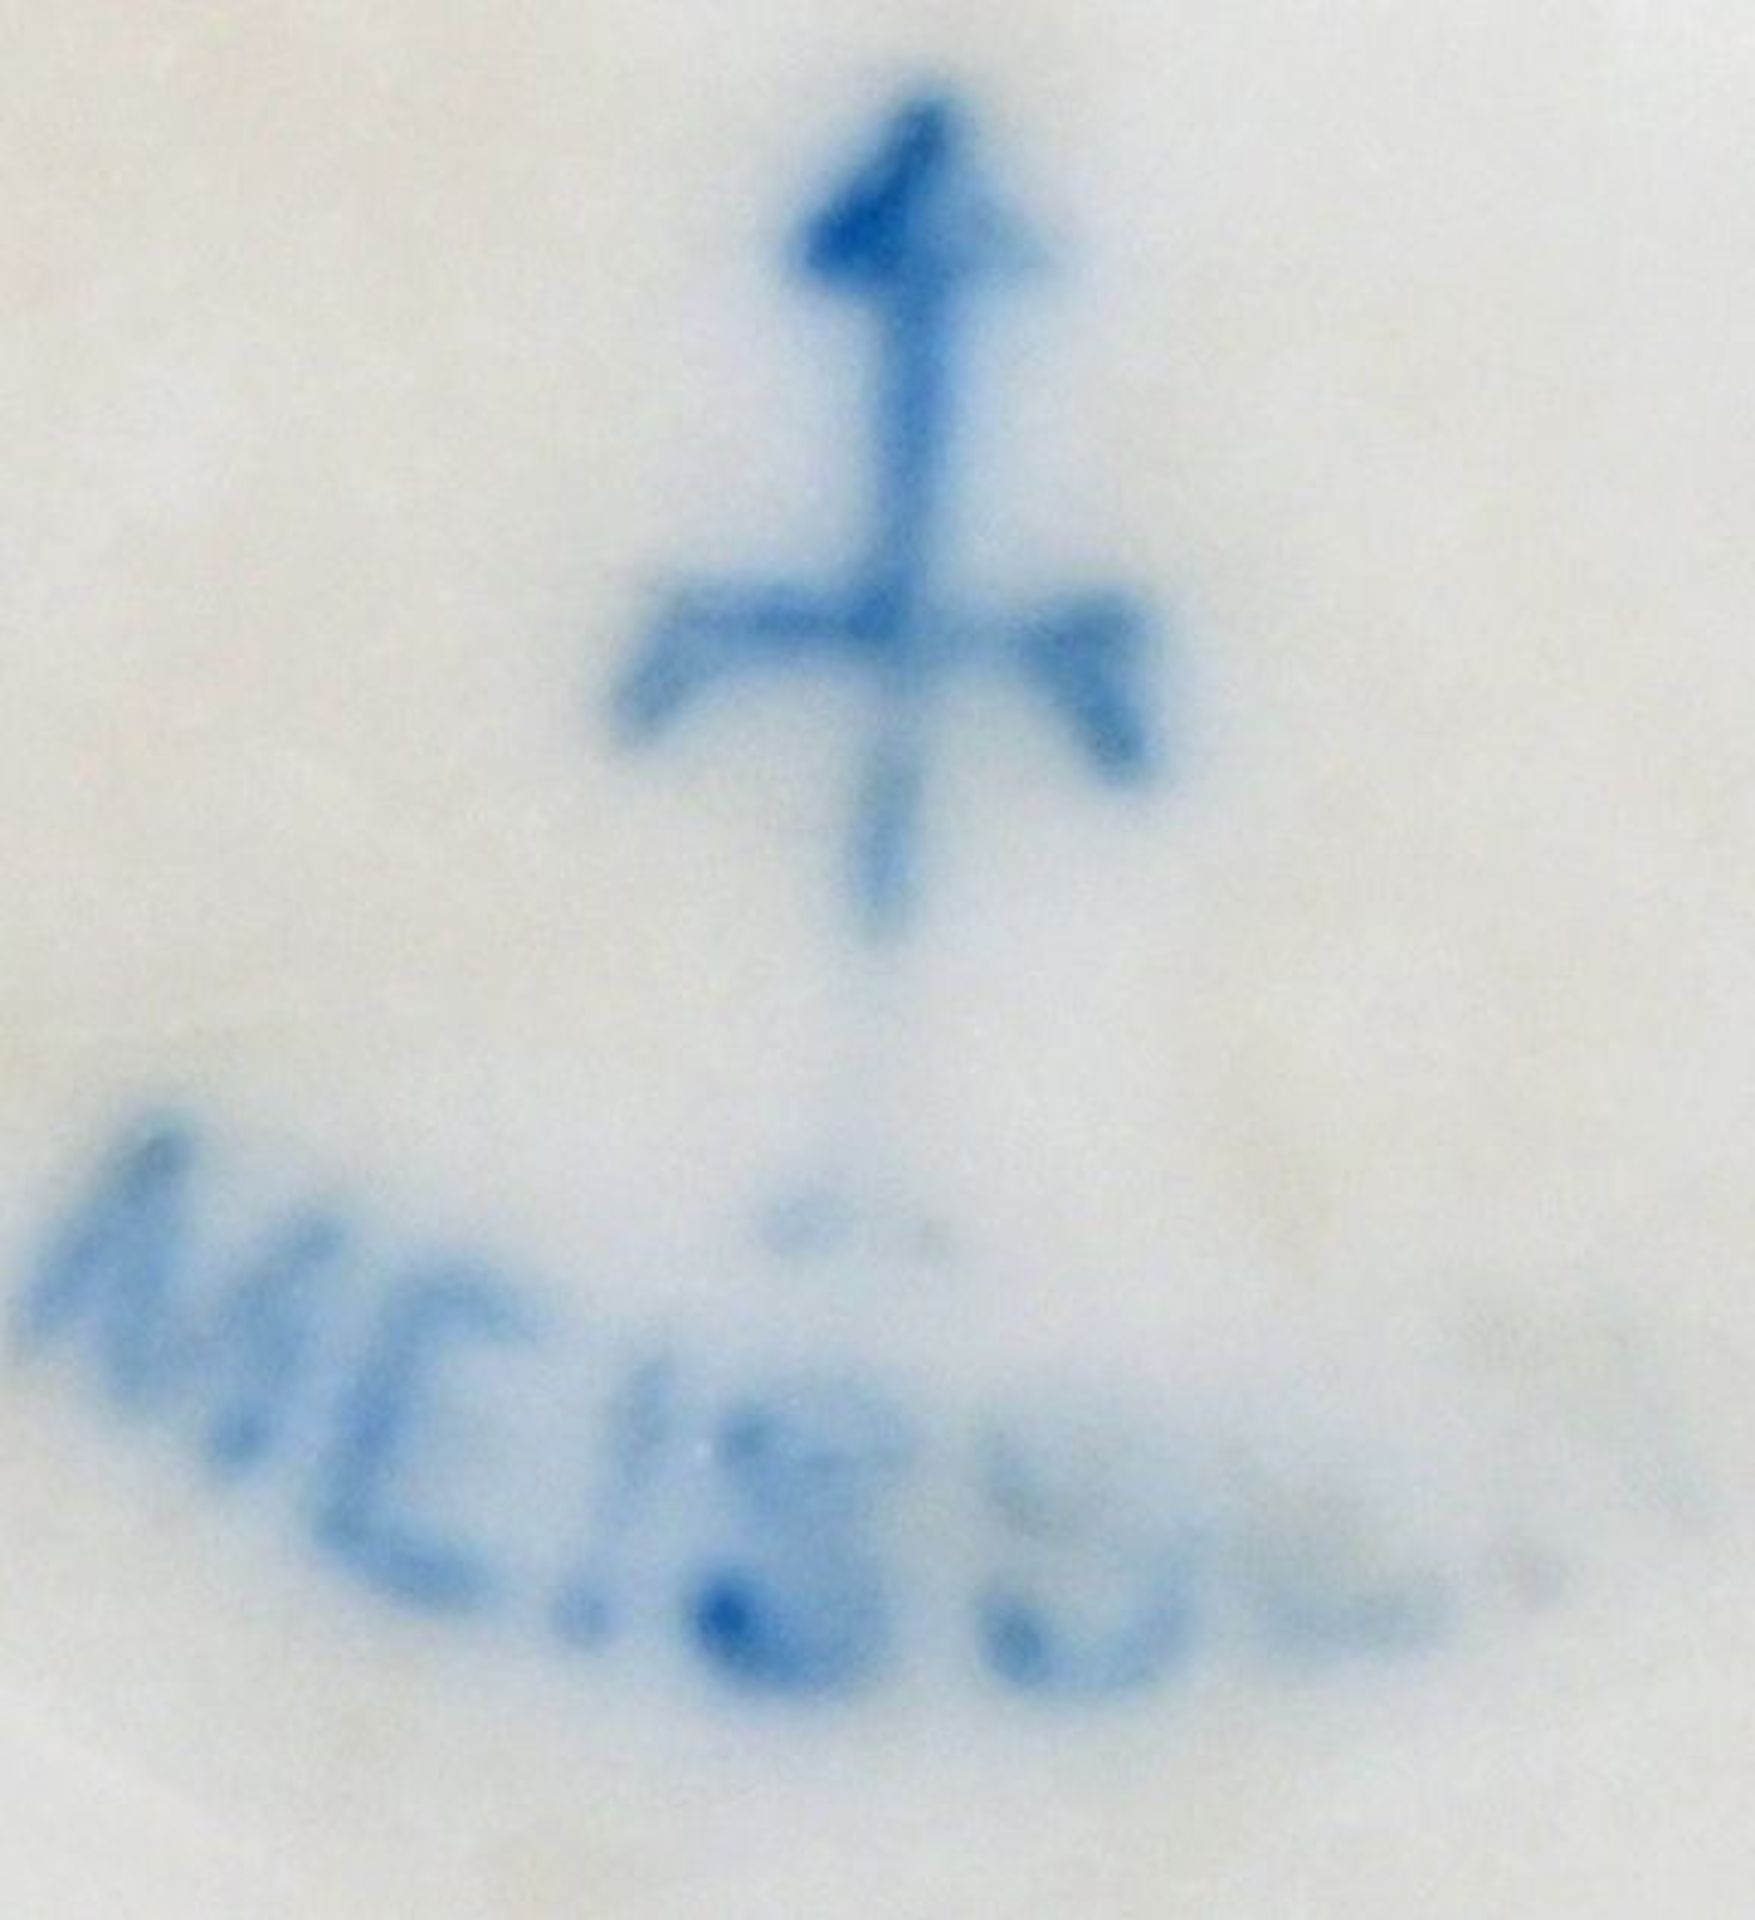 Zwei Teile Zwiebelmustergeschirr/ two items of porcelain - Image 2 of 3